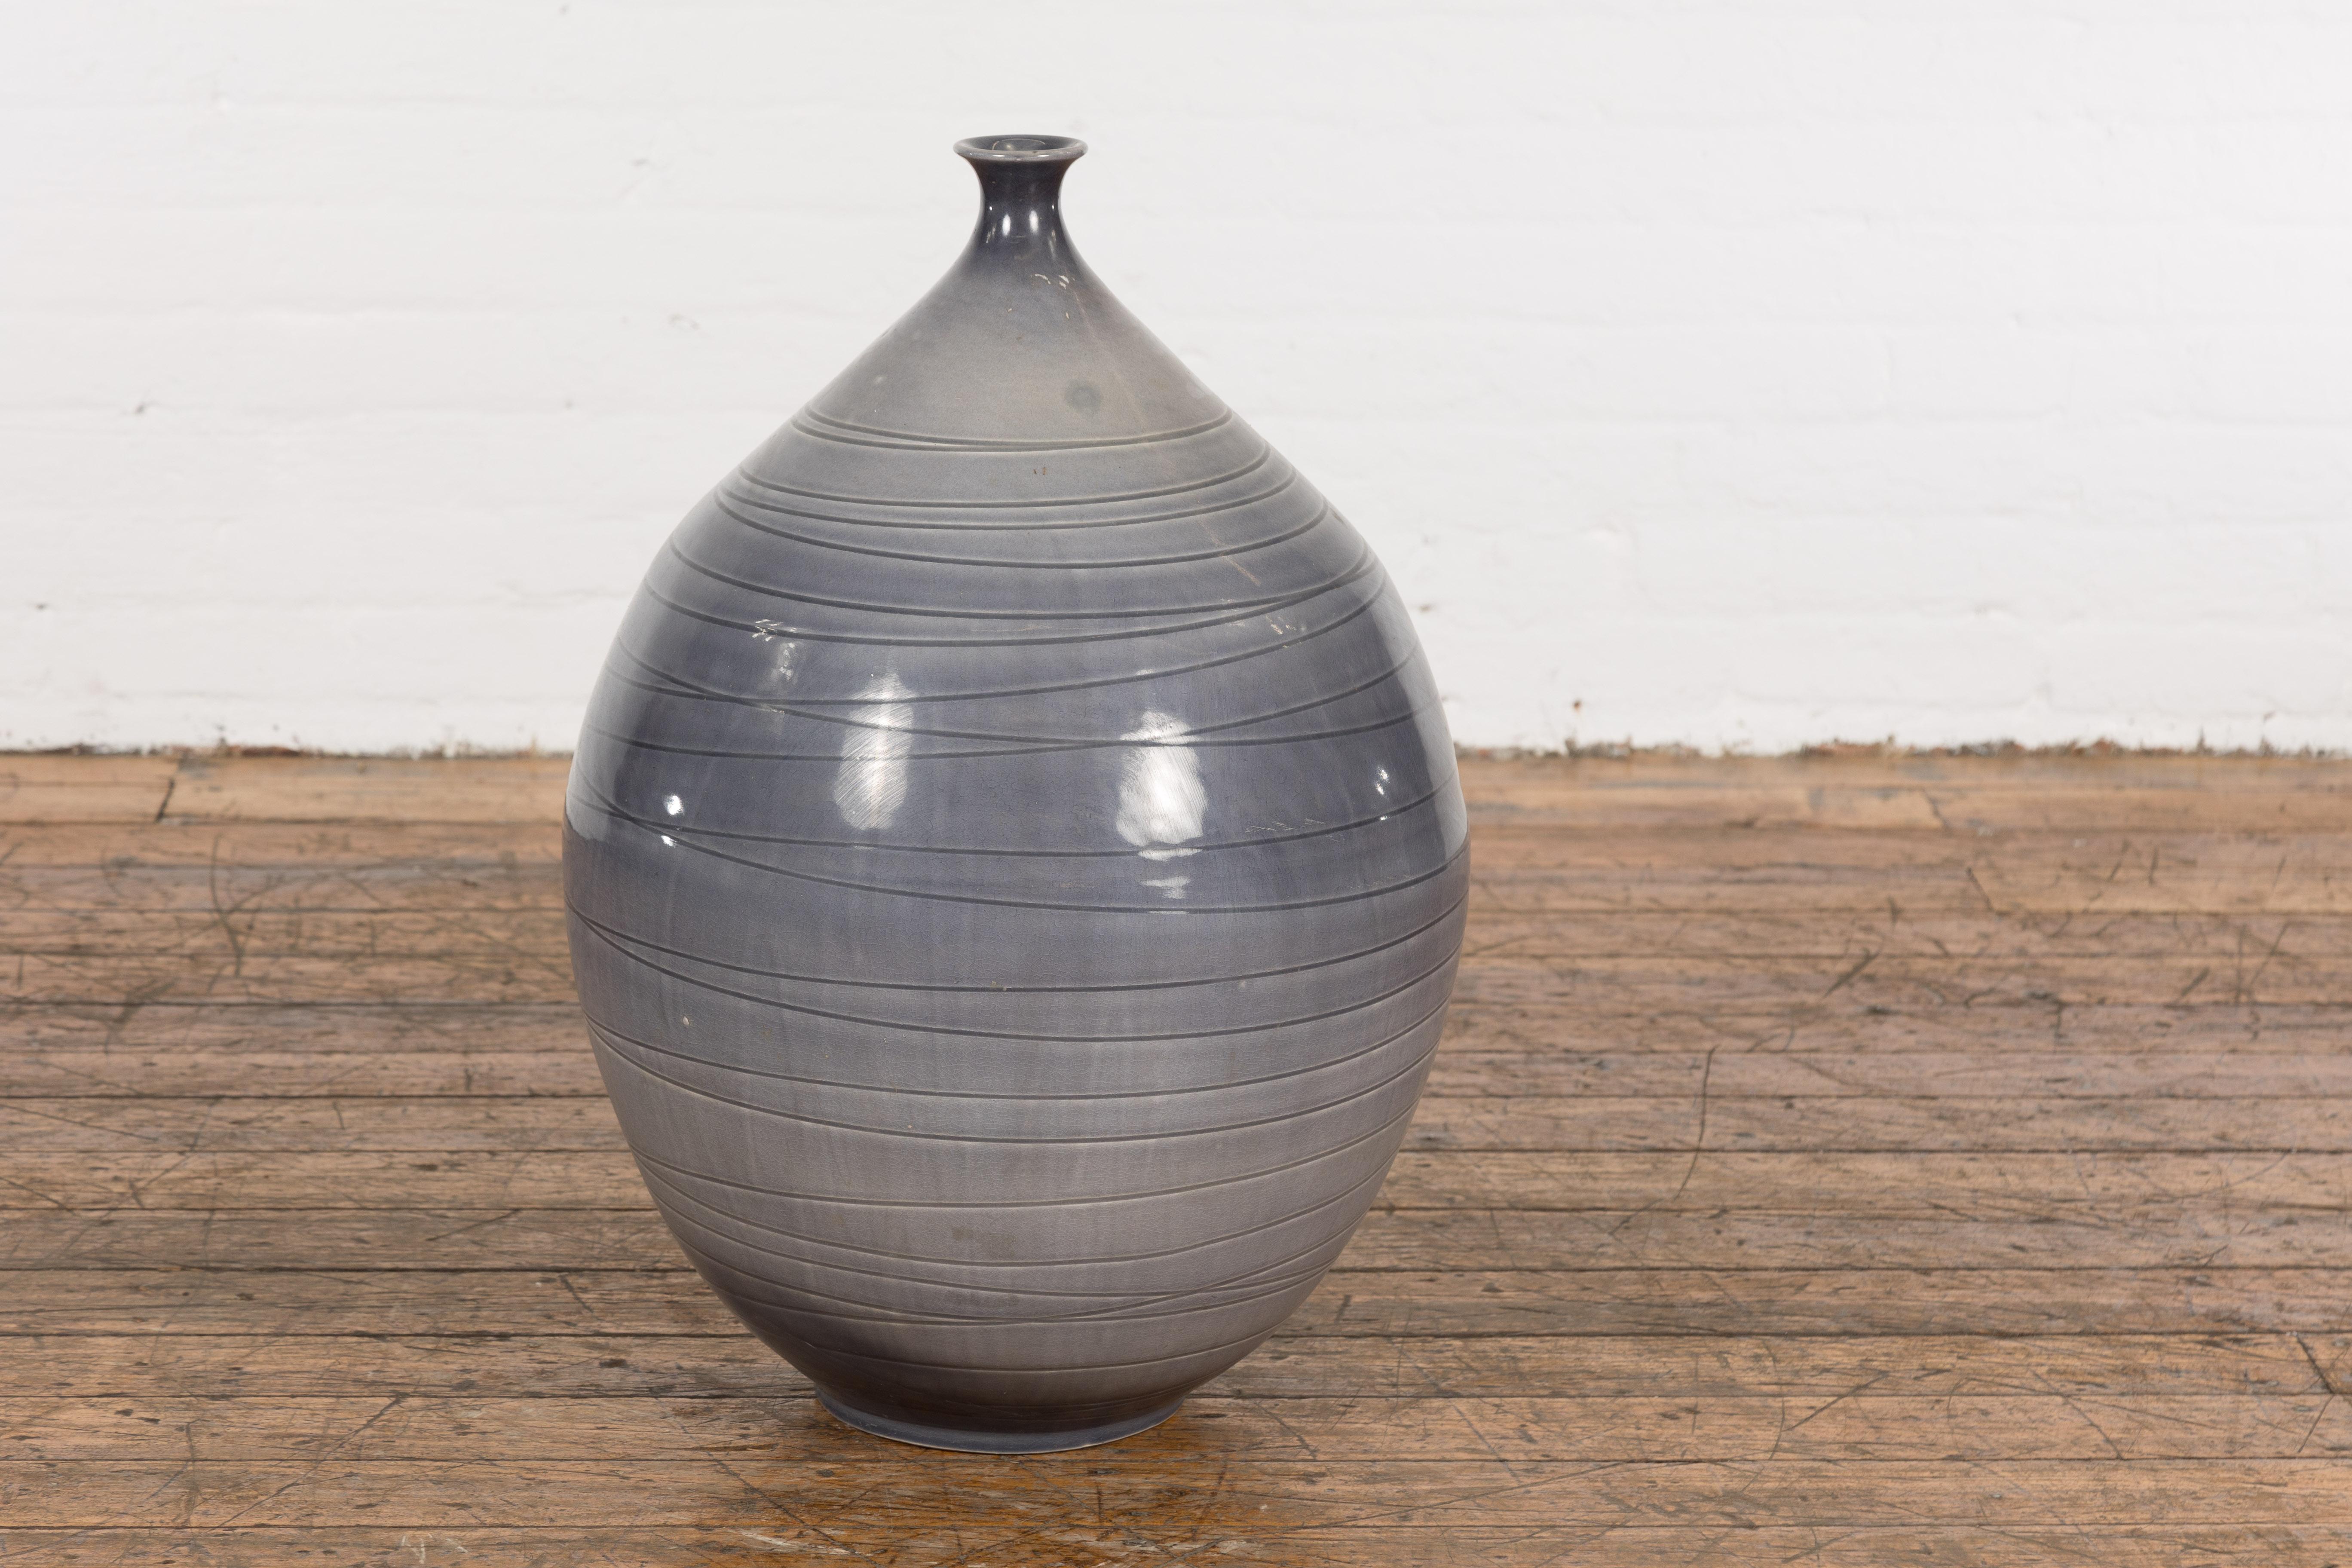 A contemporary Prem Collection artisan hand crafted ceramic vase with narrow mouth, blue grey glaze and striated effects. Showcasing elegant lines, this hand crafted Prem Collection artisan ceramic vase features a blue grey glaze beautifully